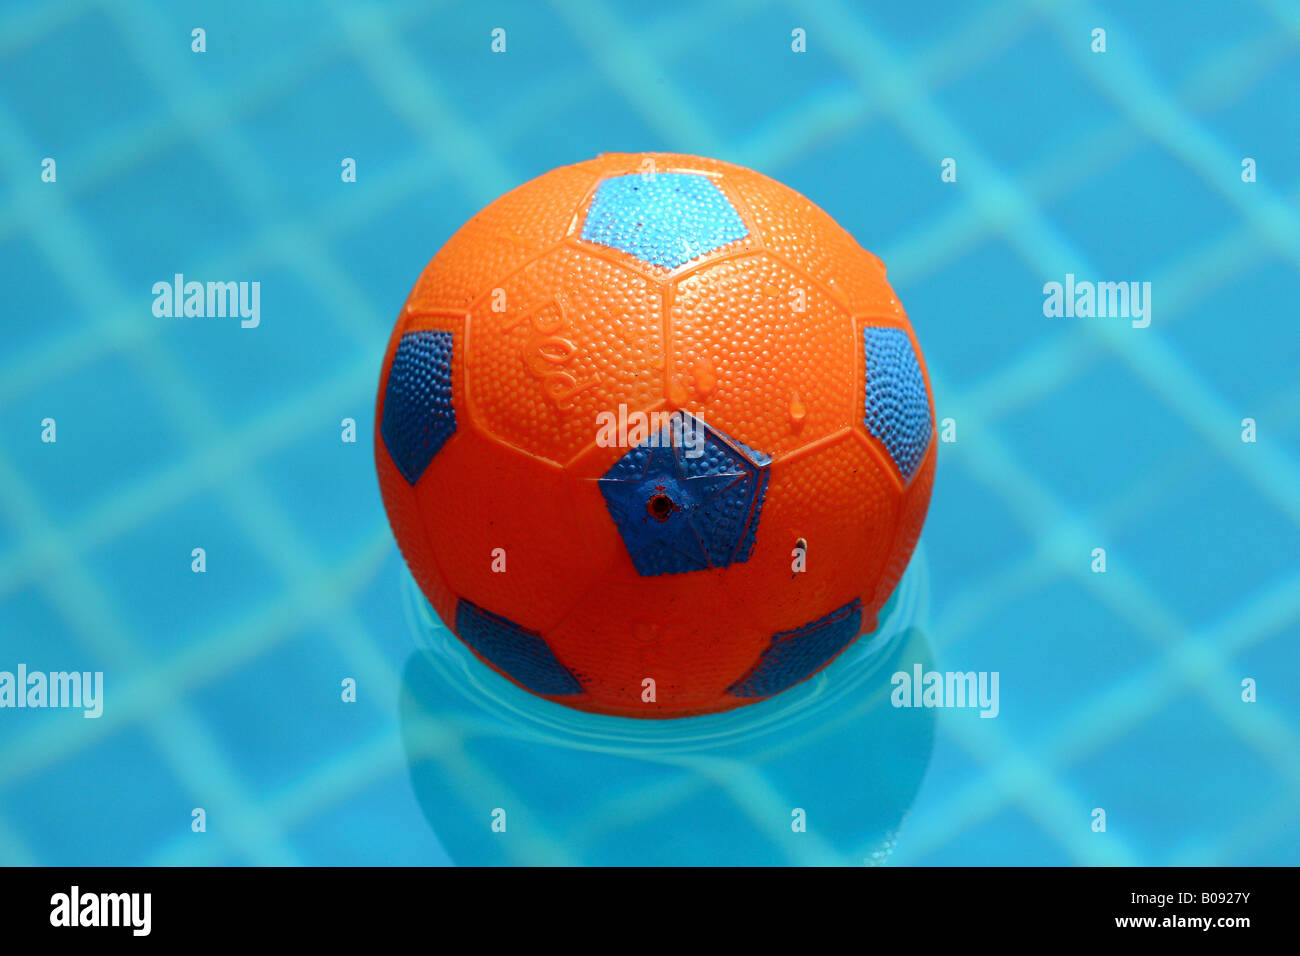 Rubber football floating in a swimming pool Stock Photo